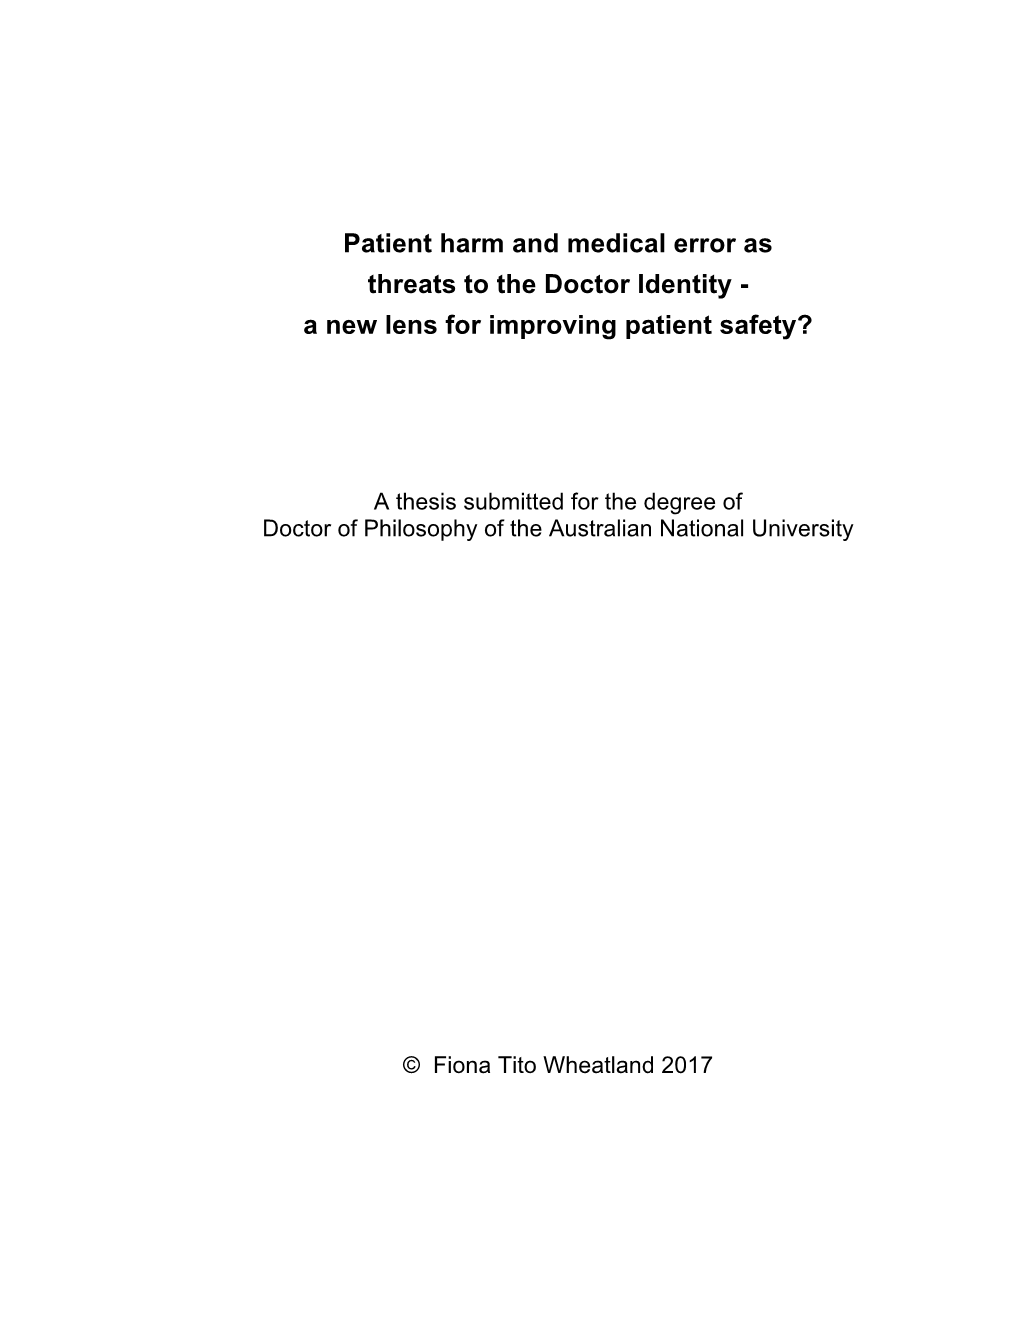 Patient Harm and Medical Error As Threats to the Doctor Identity - a New Lens for Improving Patient Safety?